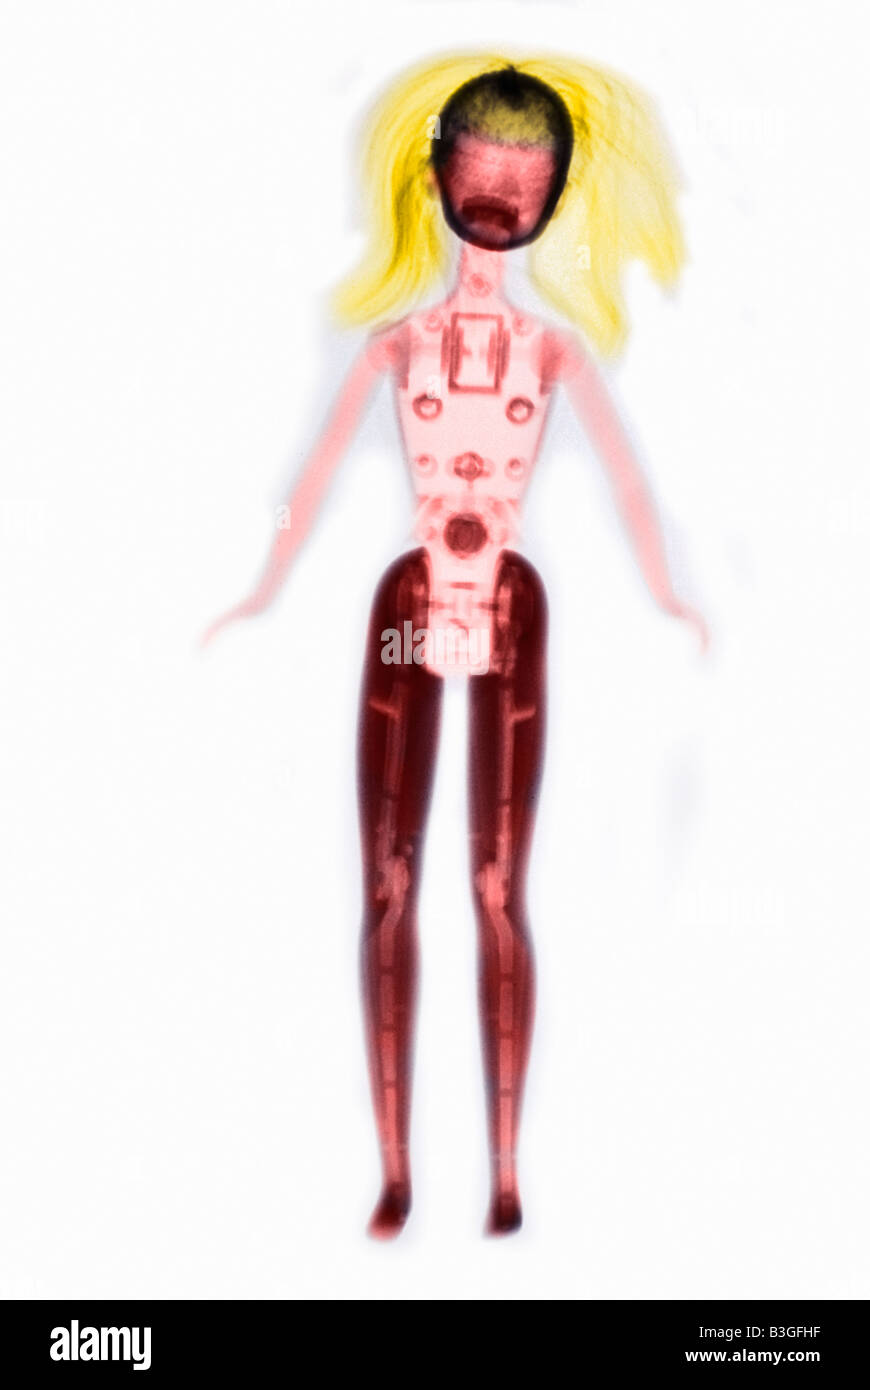 colorized x ray of a doll Stock Photo